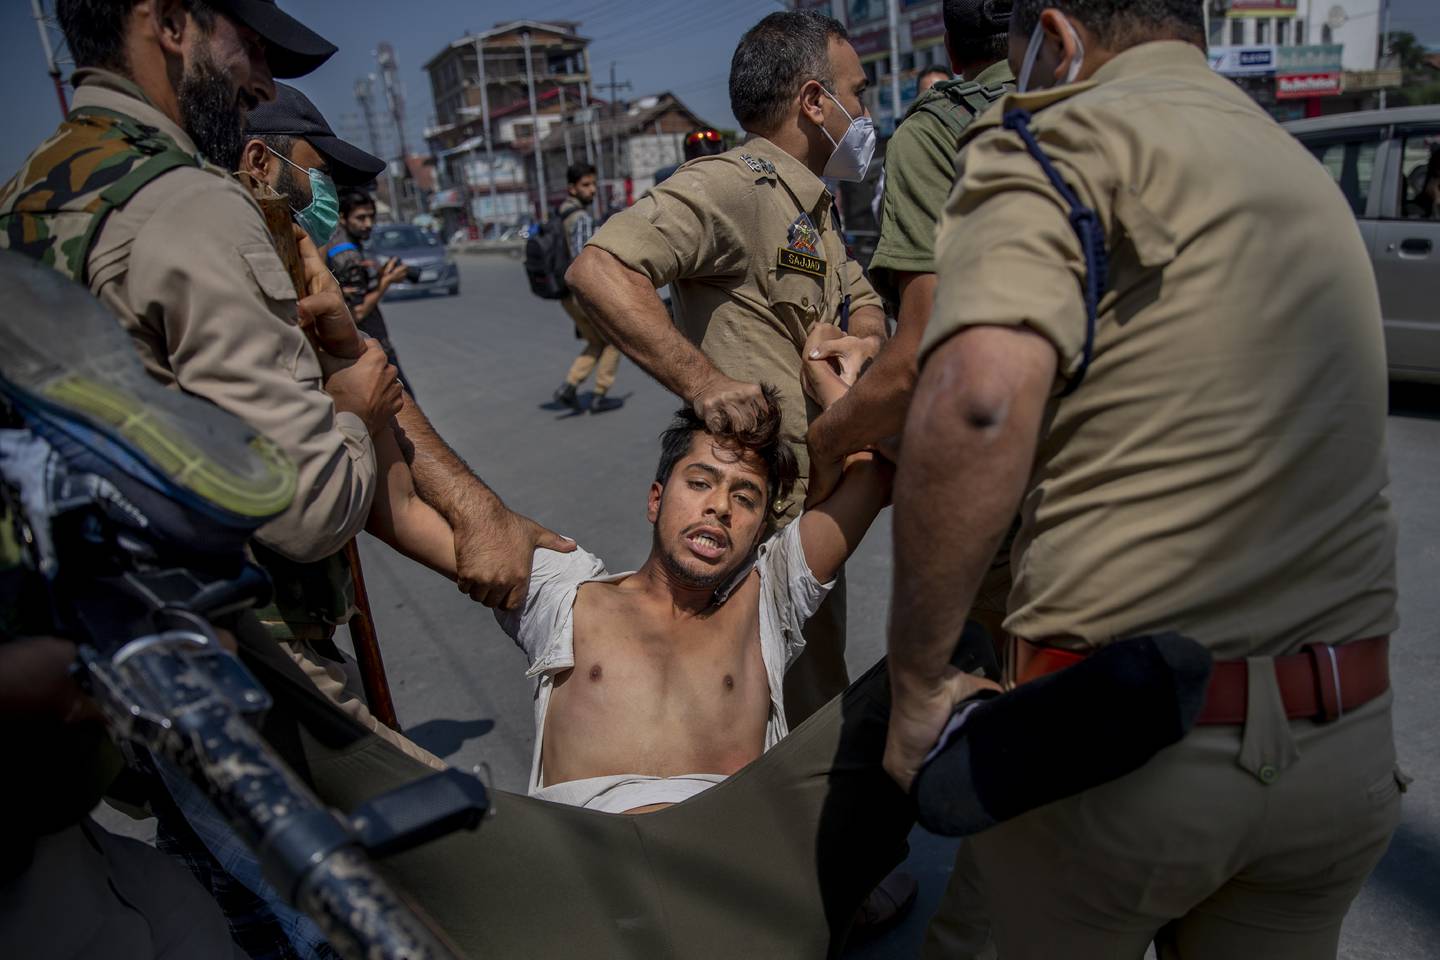 Indian policemen detain a Kashmiri Shiite Muslim for participating in a religious procession in central Srinagar, Indian controlled Kashmir, Tuesday, Aug. 17, 2021. Police in Indian-controlled Kashmir on Tuesday fired tear gas and warning shots to disperse hundreds of Shiite Muslims, while detaining dozens who attempted to participate in processions marking the Muslim month of Muharram. (AP Photo/Dar Yasin)